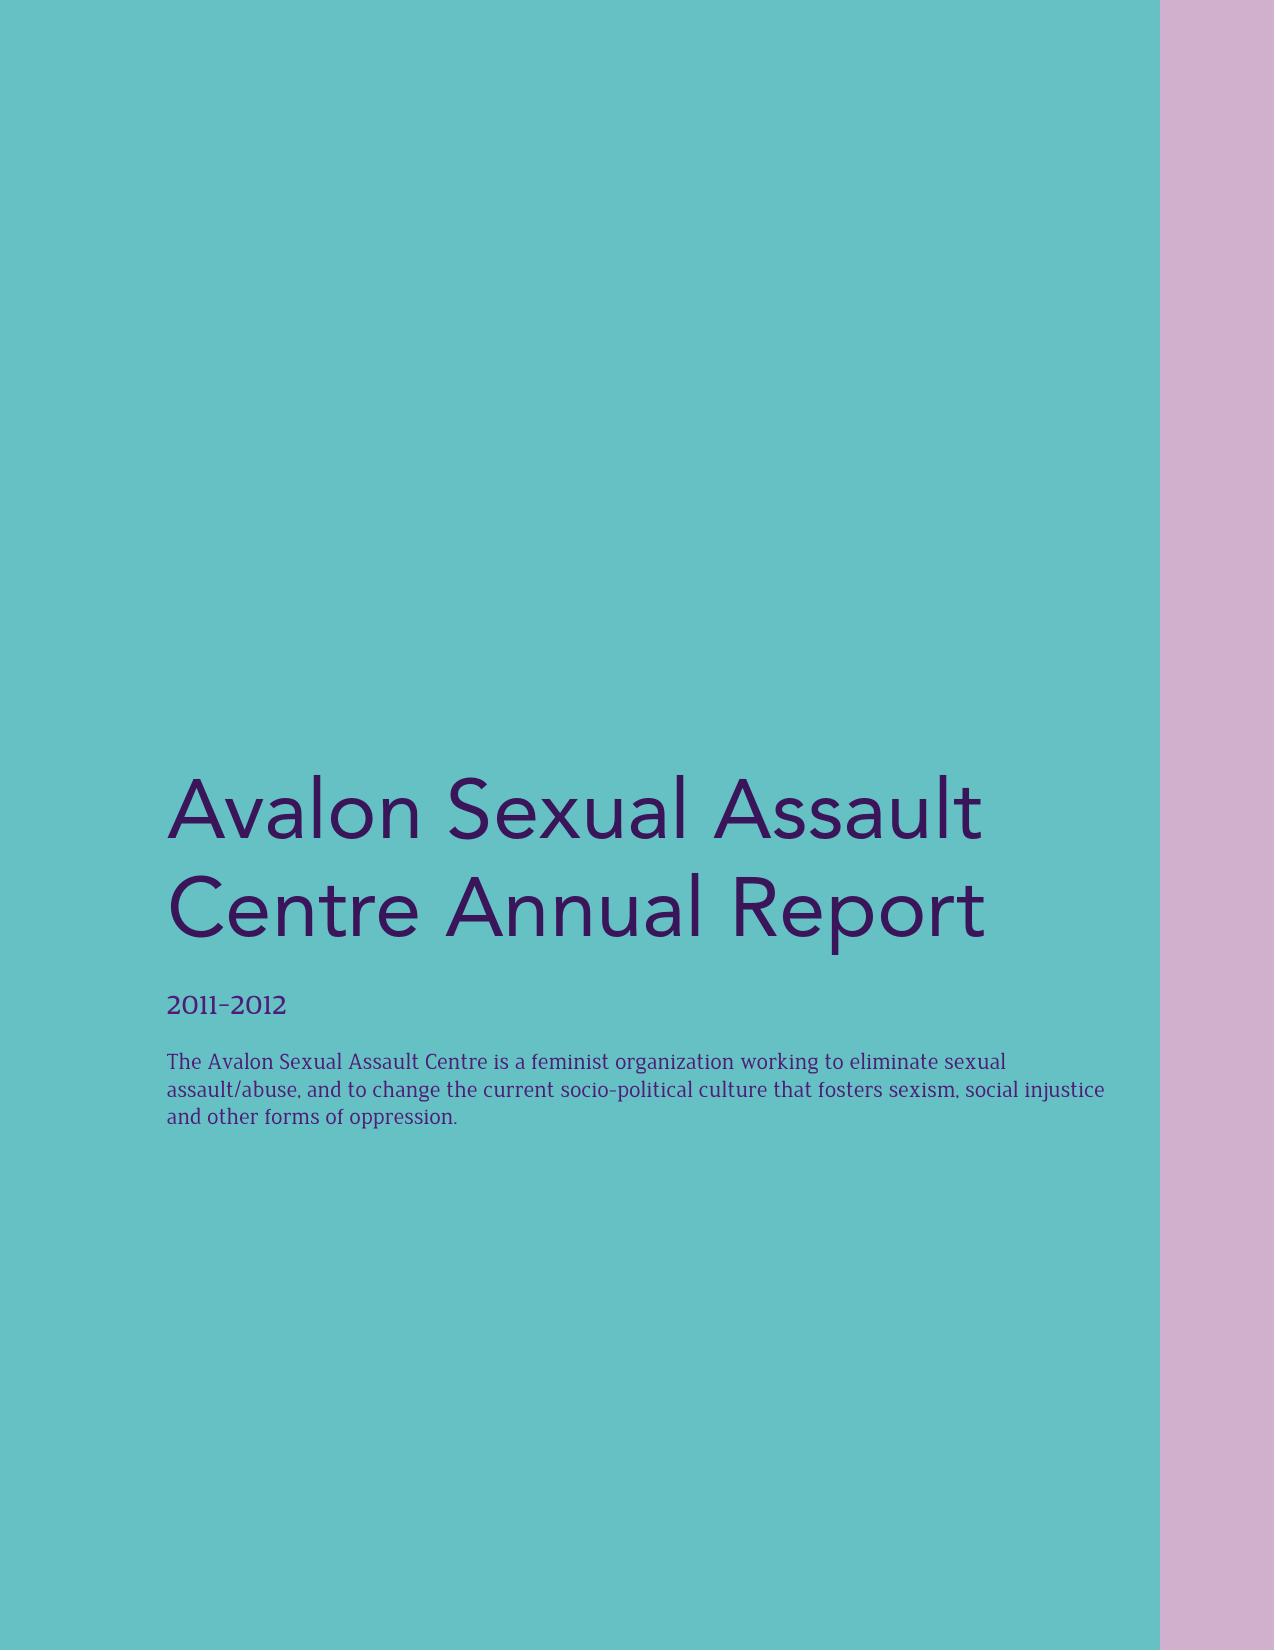 AVALONCENTRE 2023 Annual Report